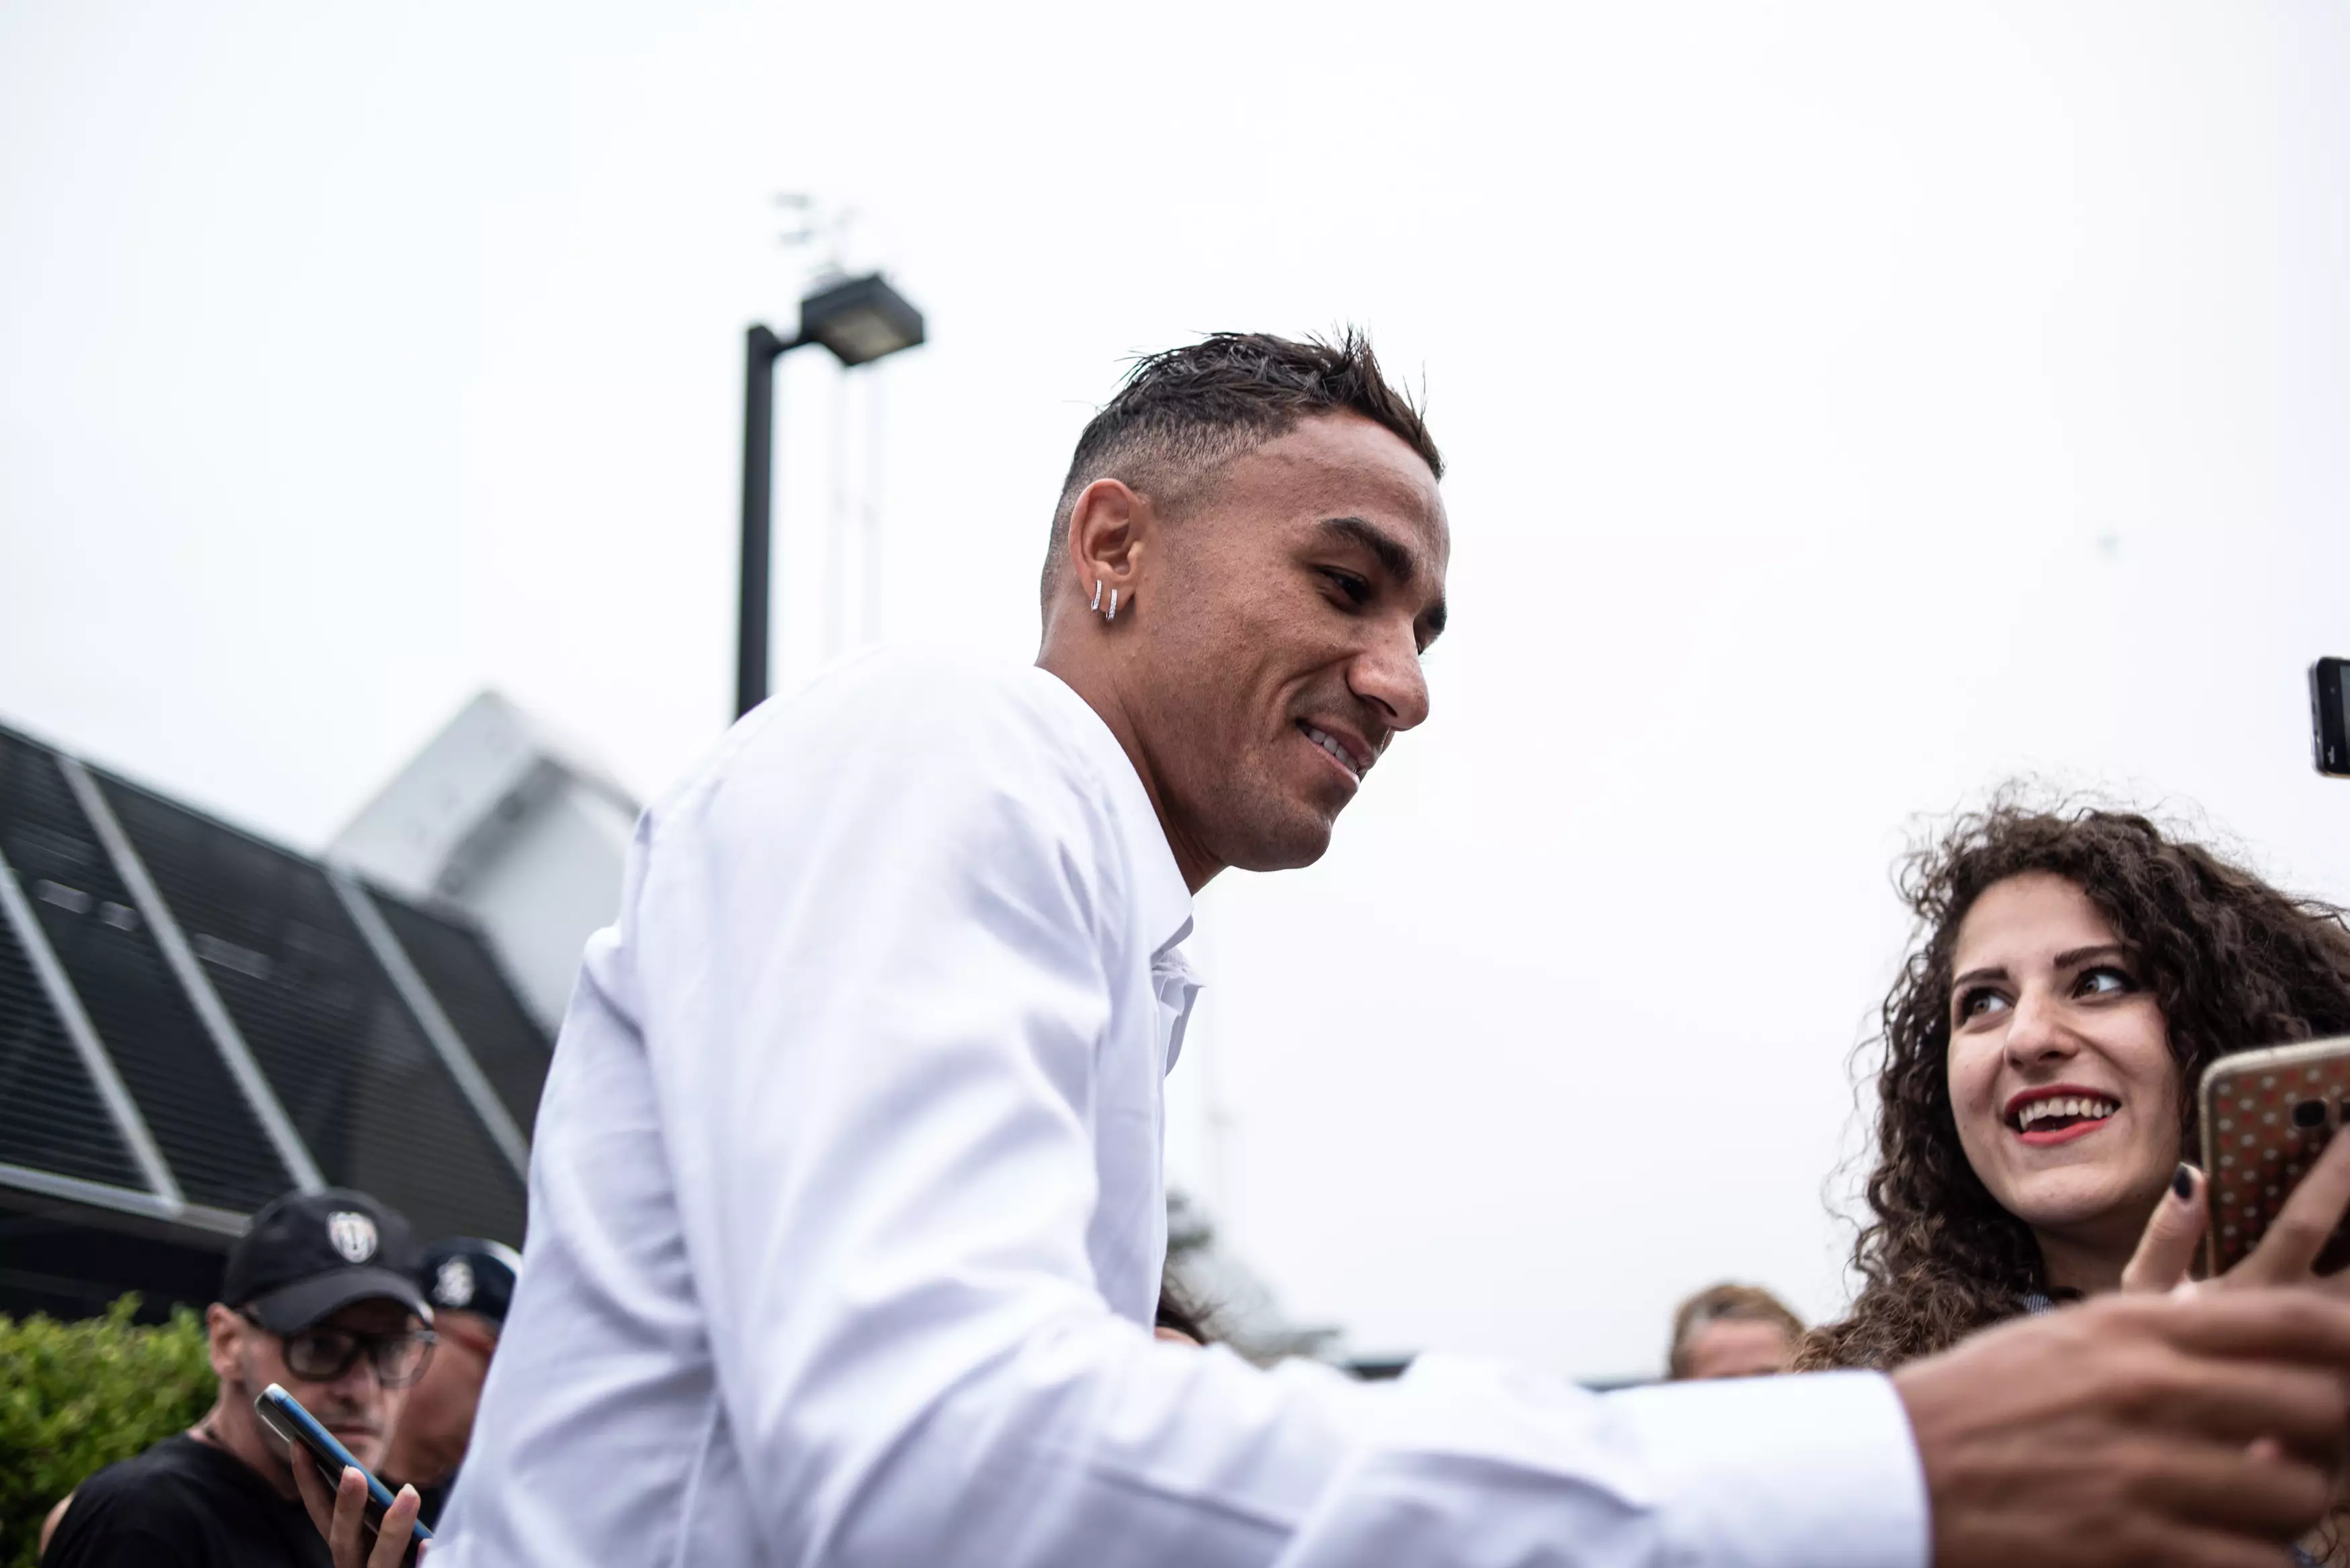 Danilo greeted by fans at Juventus. Image: PA Images